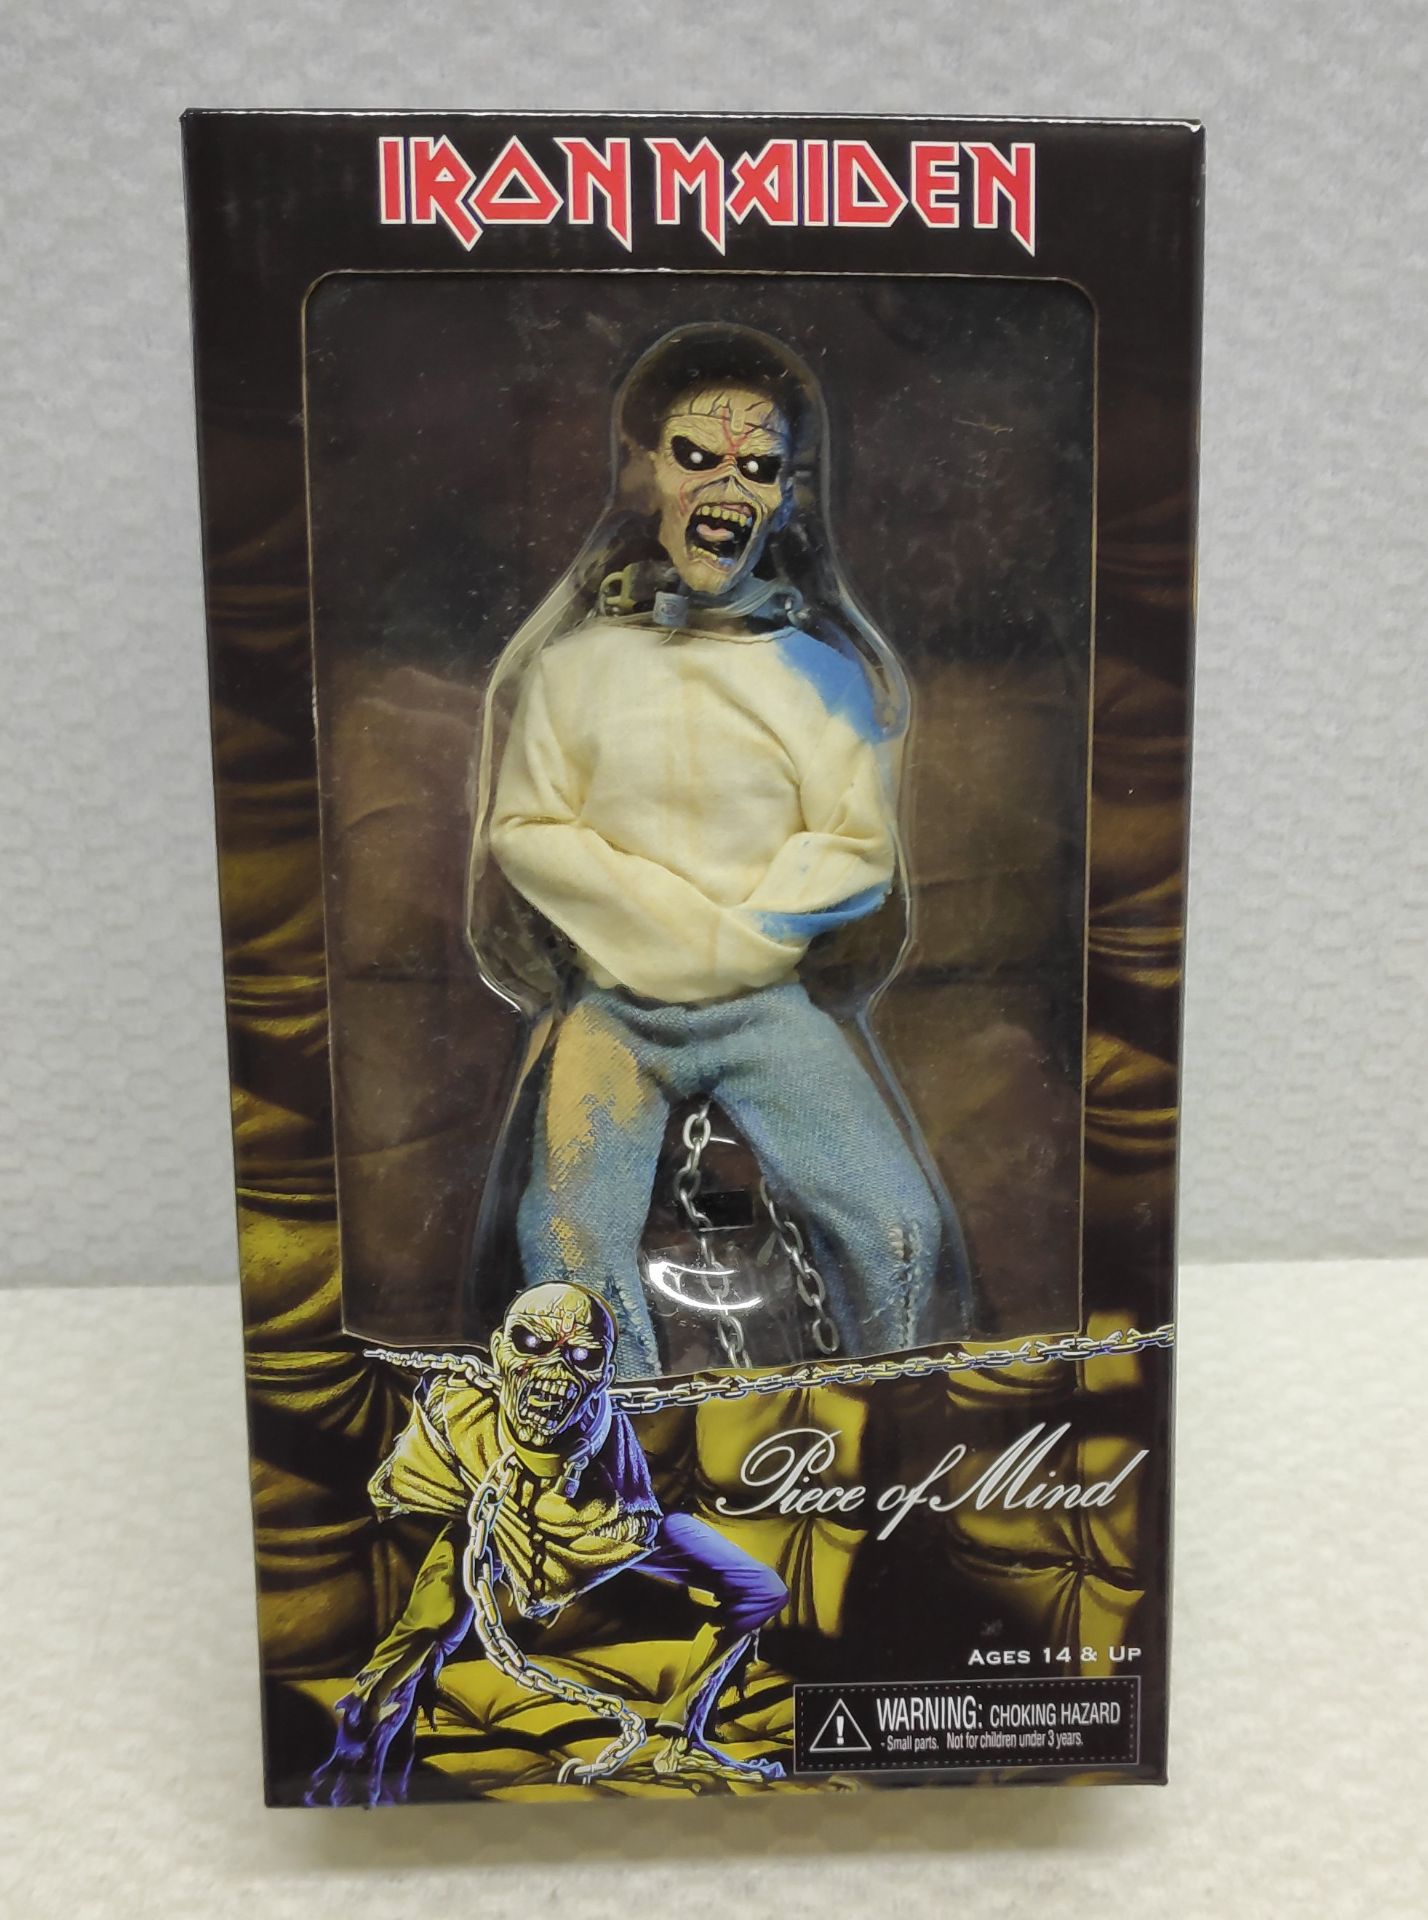 1 x Iron Maiden Eddie Piece of Mind NECA Action Figure - New/Boxed - HTYS166 - CL720 - Location: Alt - Image 5 of 11